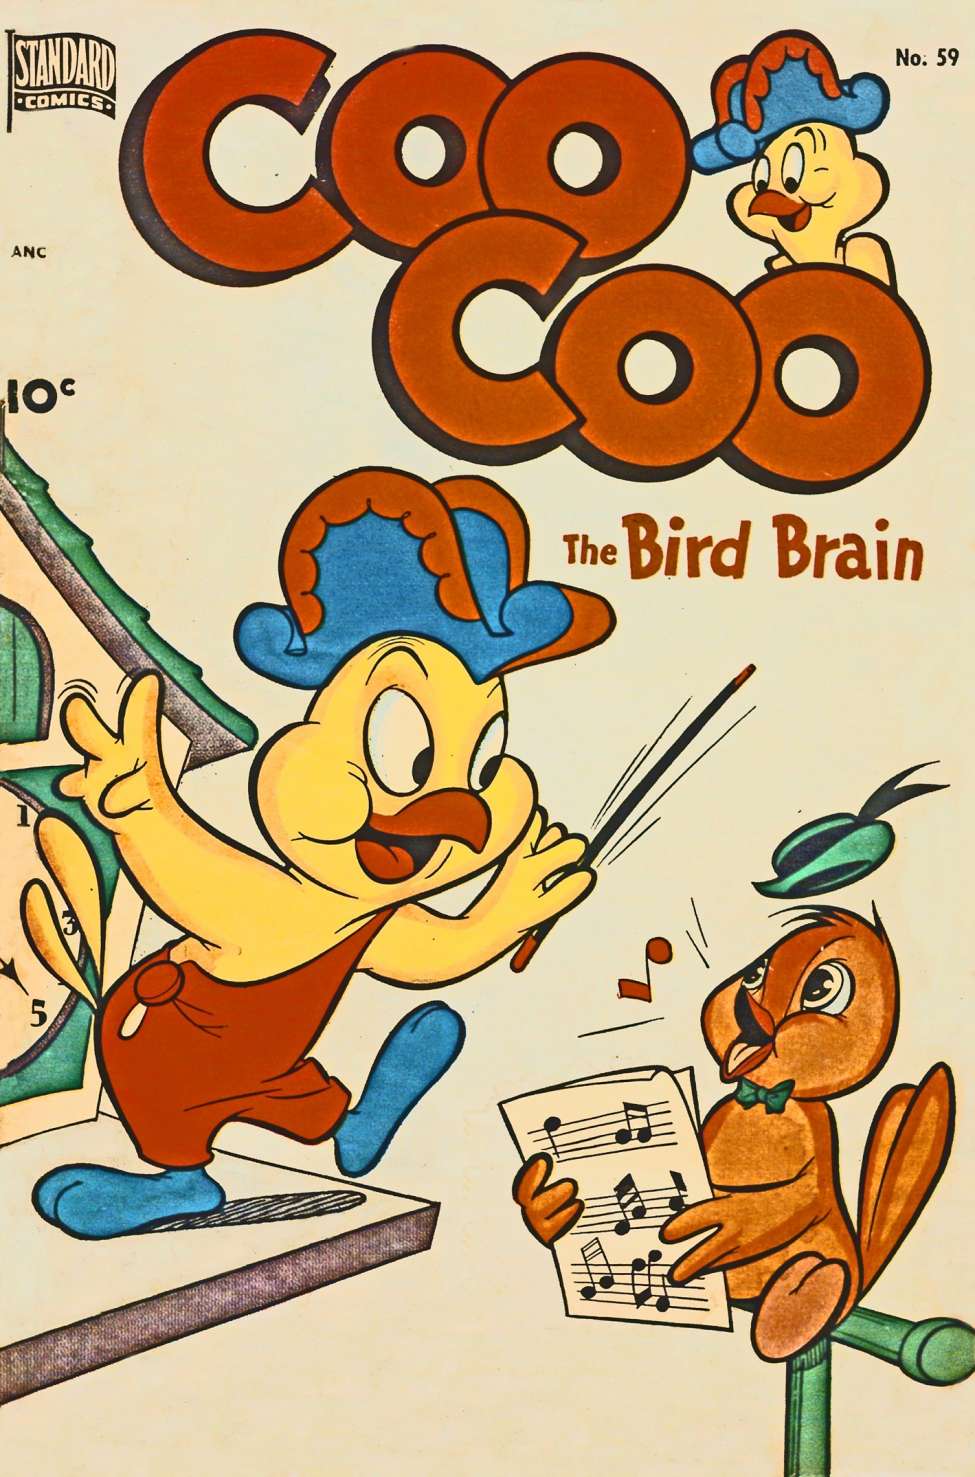 Book Cover For Coo Coo Comics 59